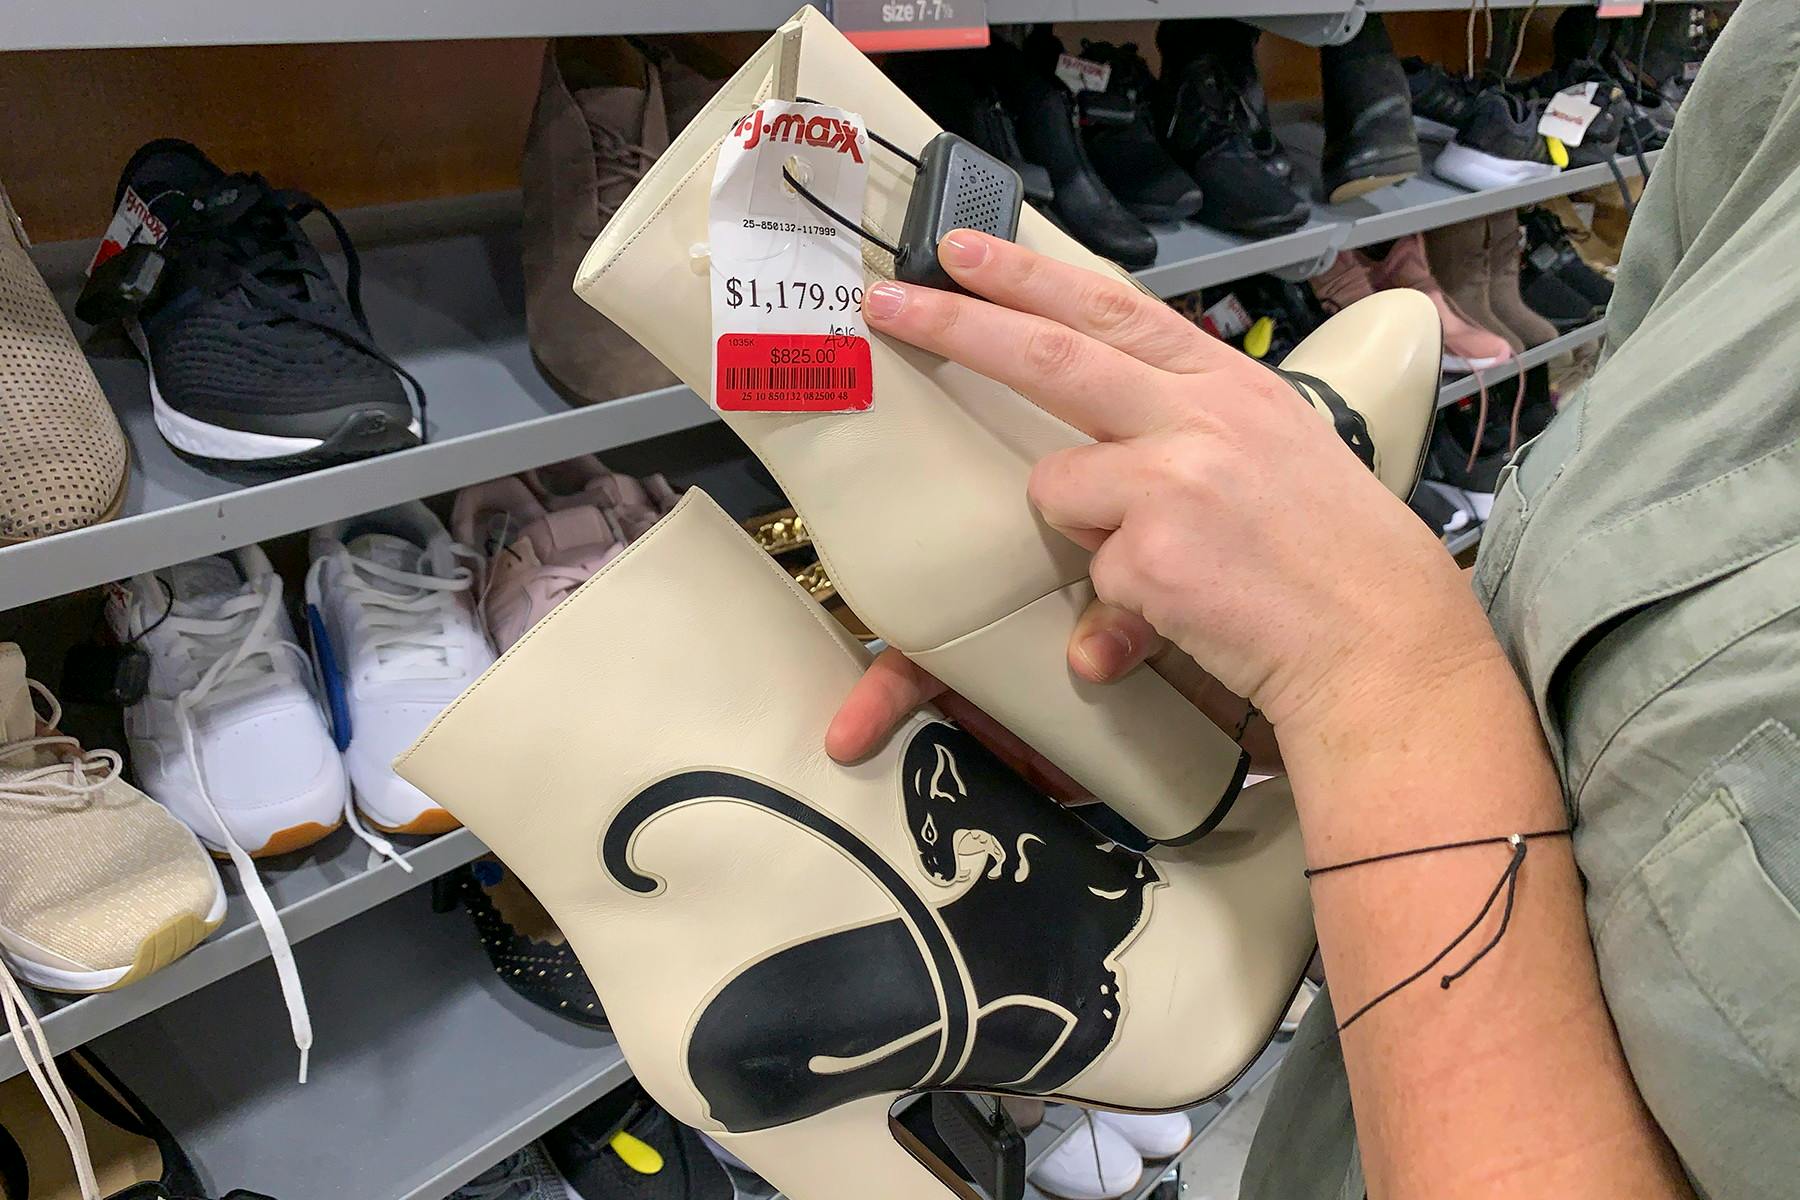 TJ Maxx! New Location and AMAZING CLEARANCE on Designer Bags, Shoes and  More! 